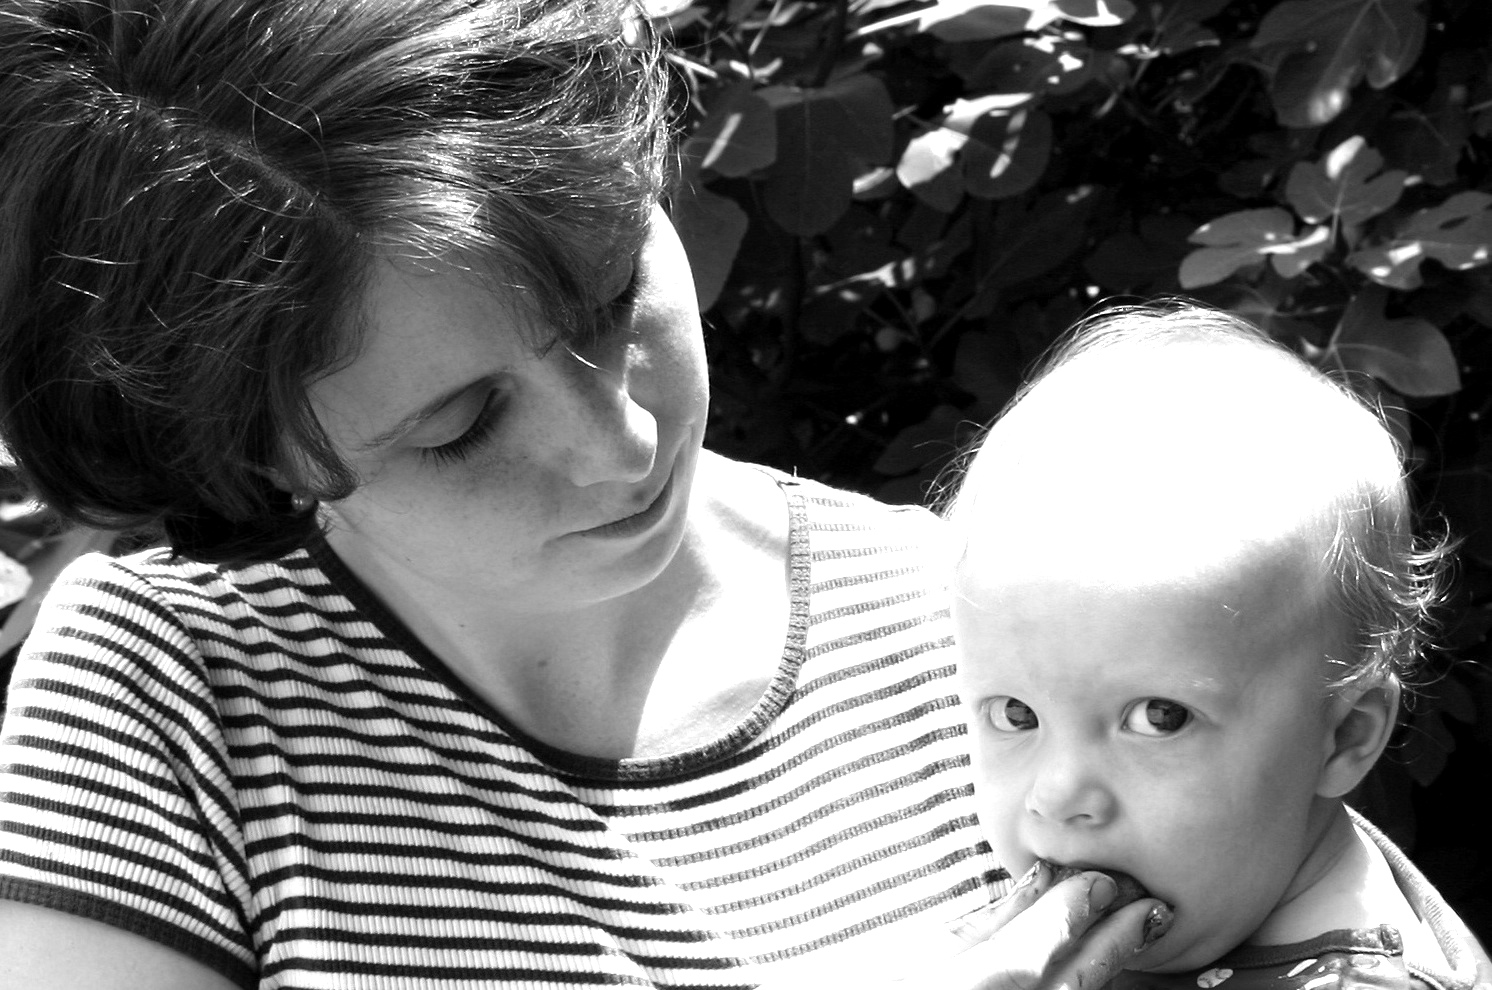 a woman in striped shirt holding a baby